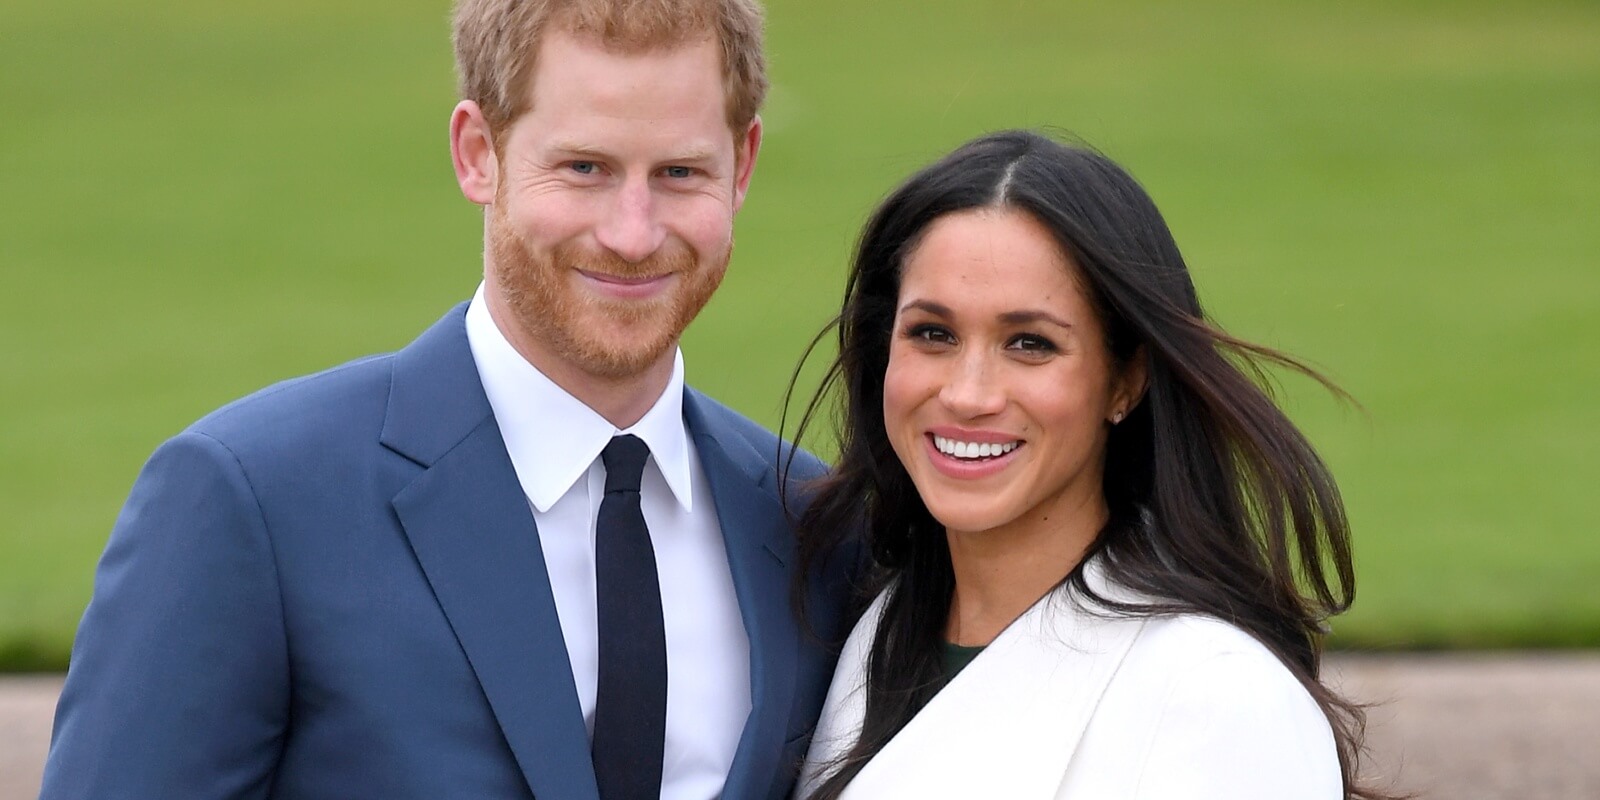 Prince Harry and Meghan Markle pose for photographers in 2017.